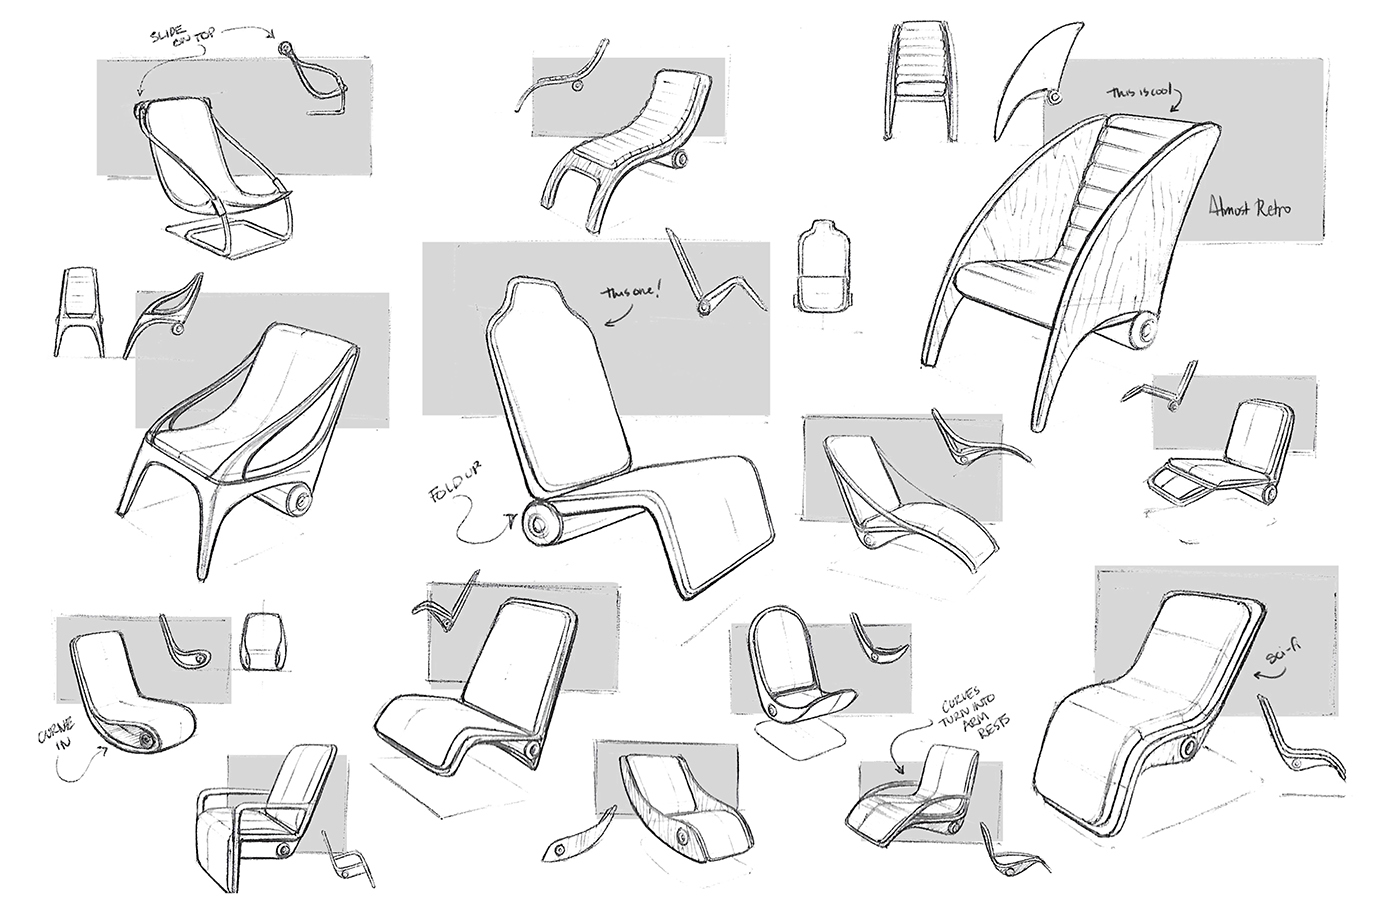 ideation sketching sketch product design chair design furniture Bicycle hanger